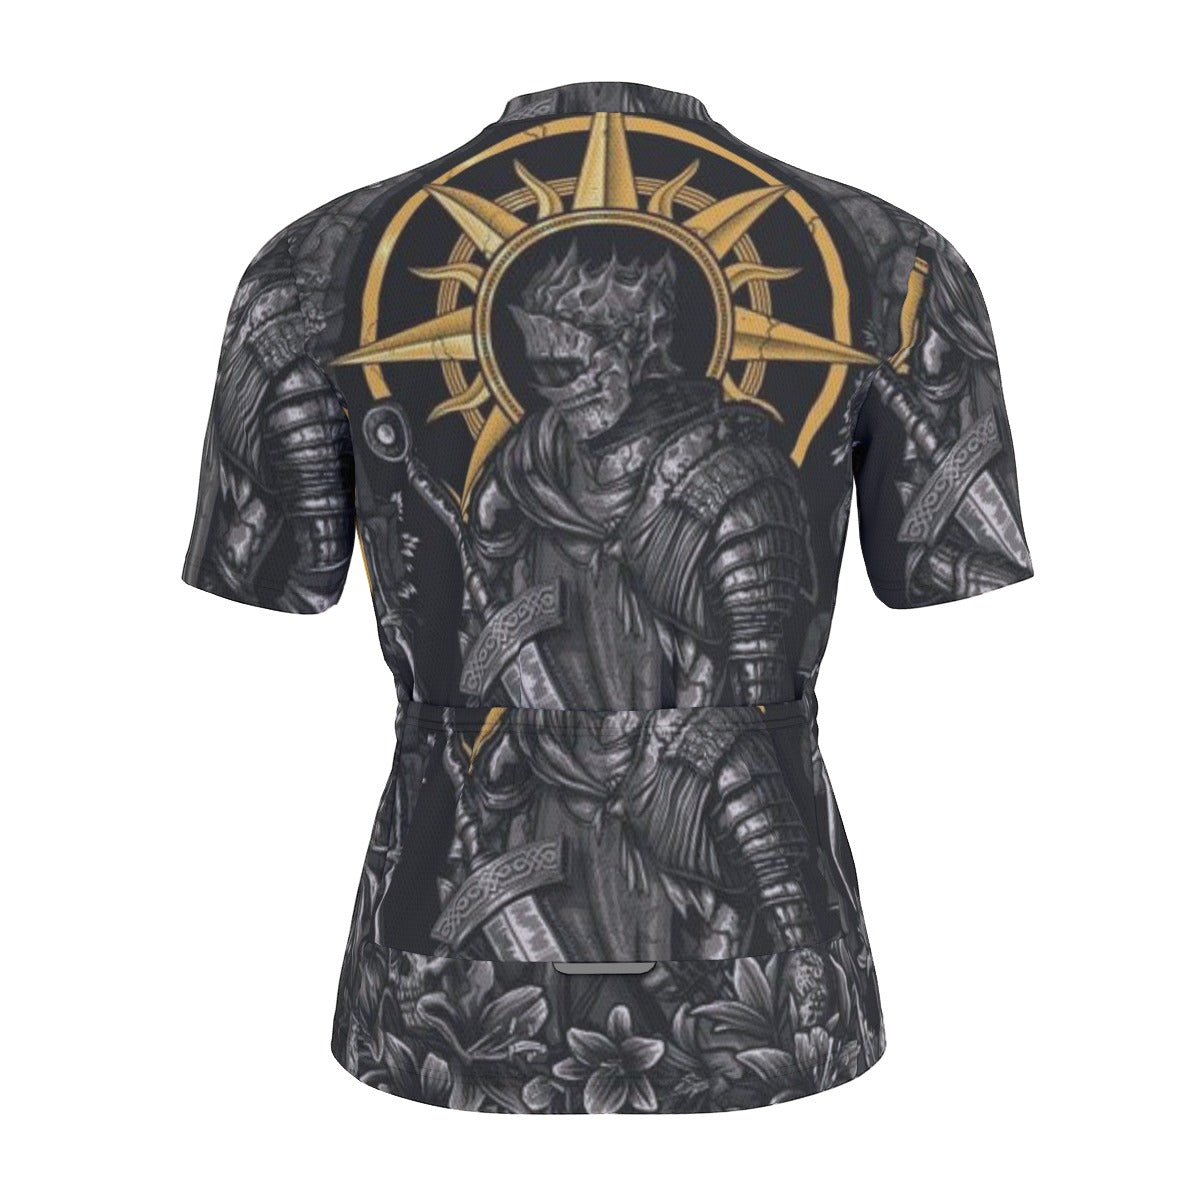 All-Over Print Men's Cycling Jersey